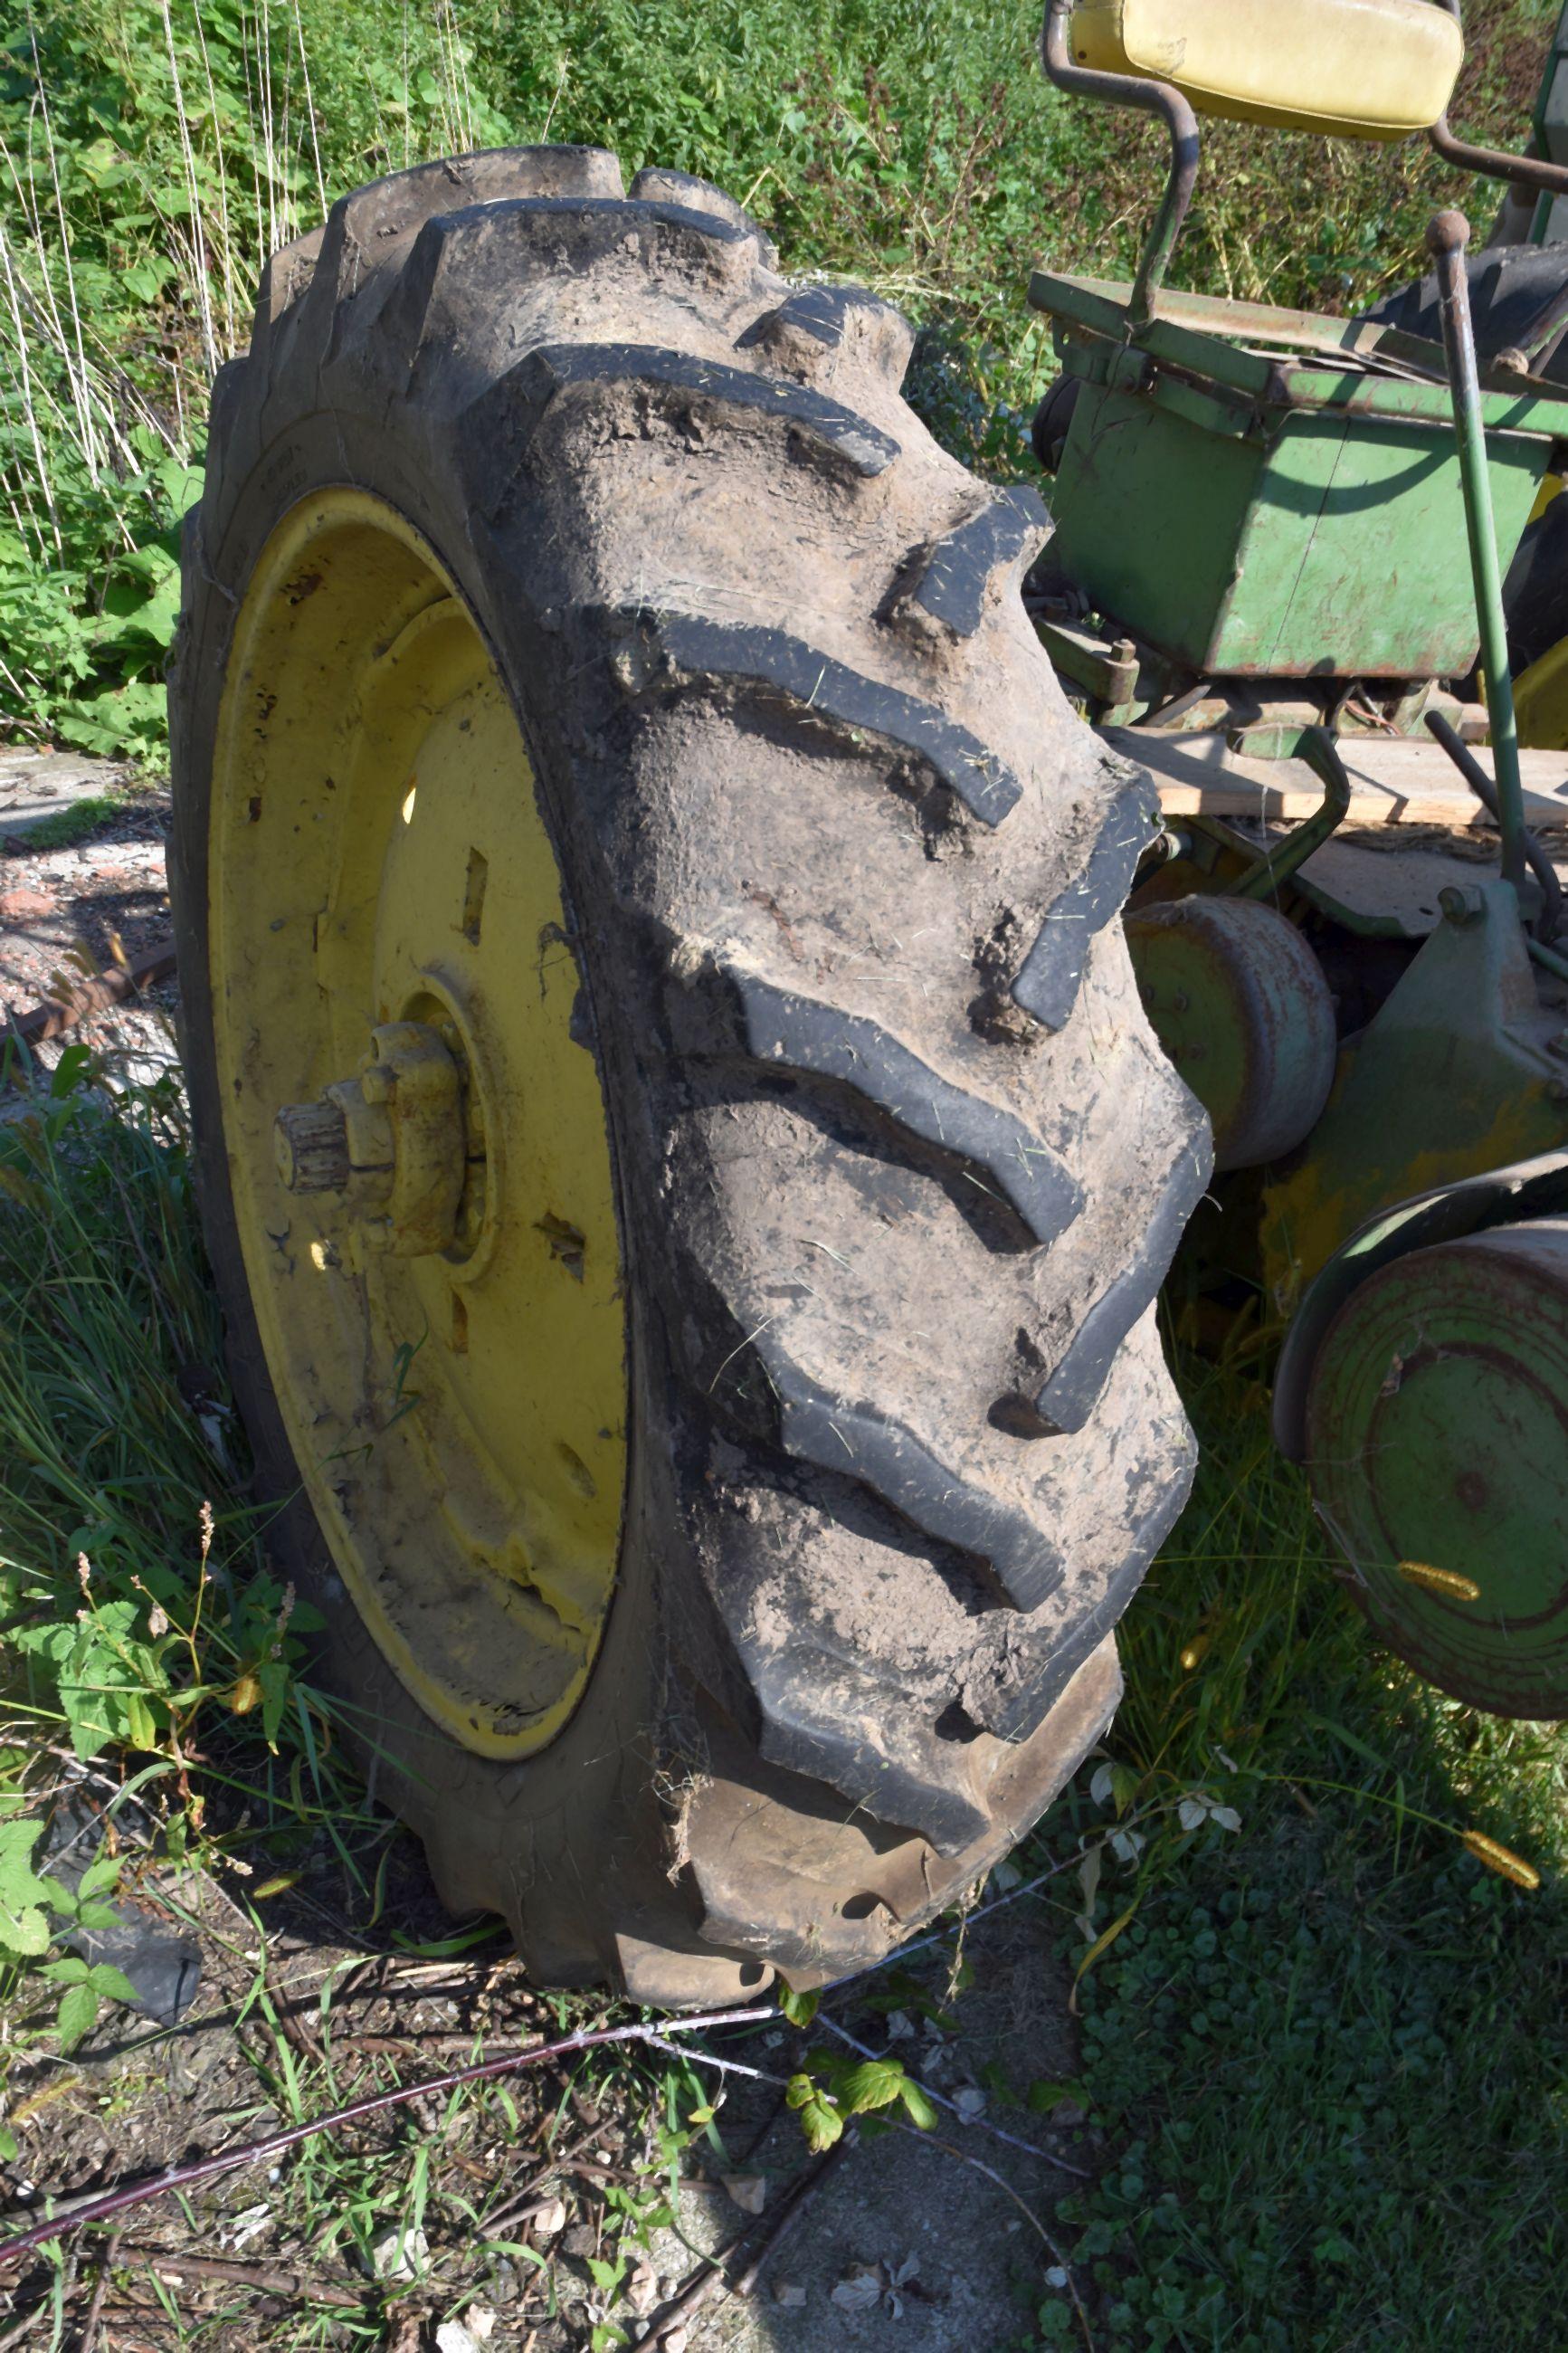 John Deere A Parts Tractor, Non-Running, 12.4x38 Tires, PTO, SN: 686343, No Front Tires